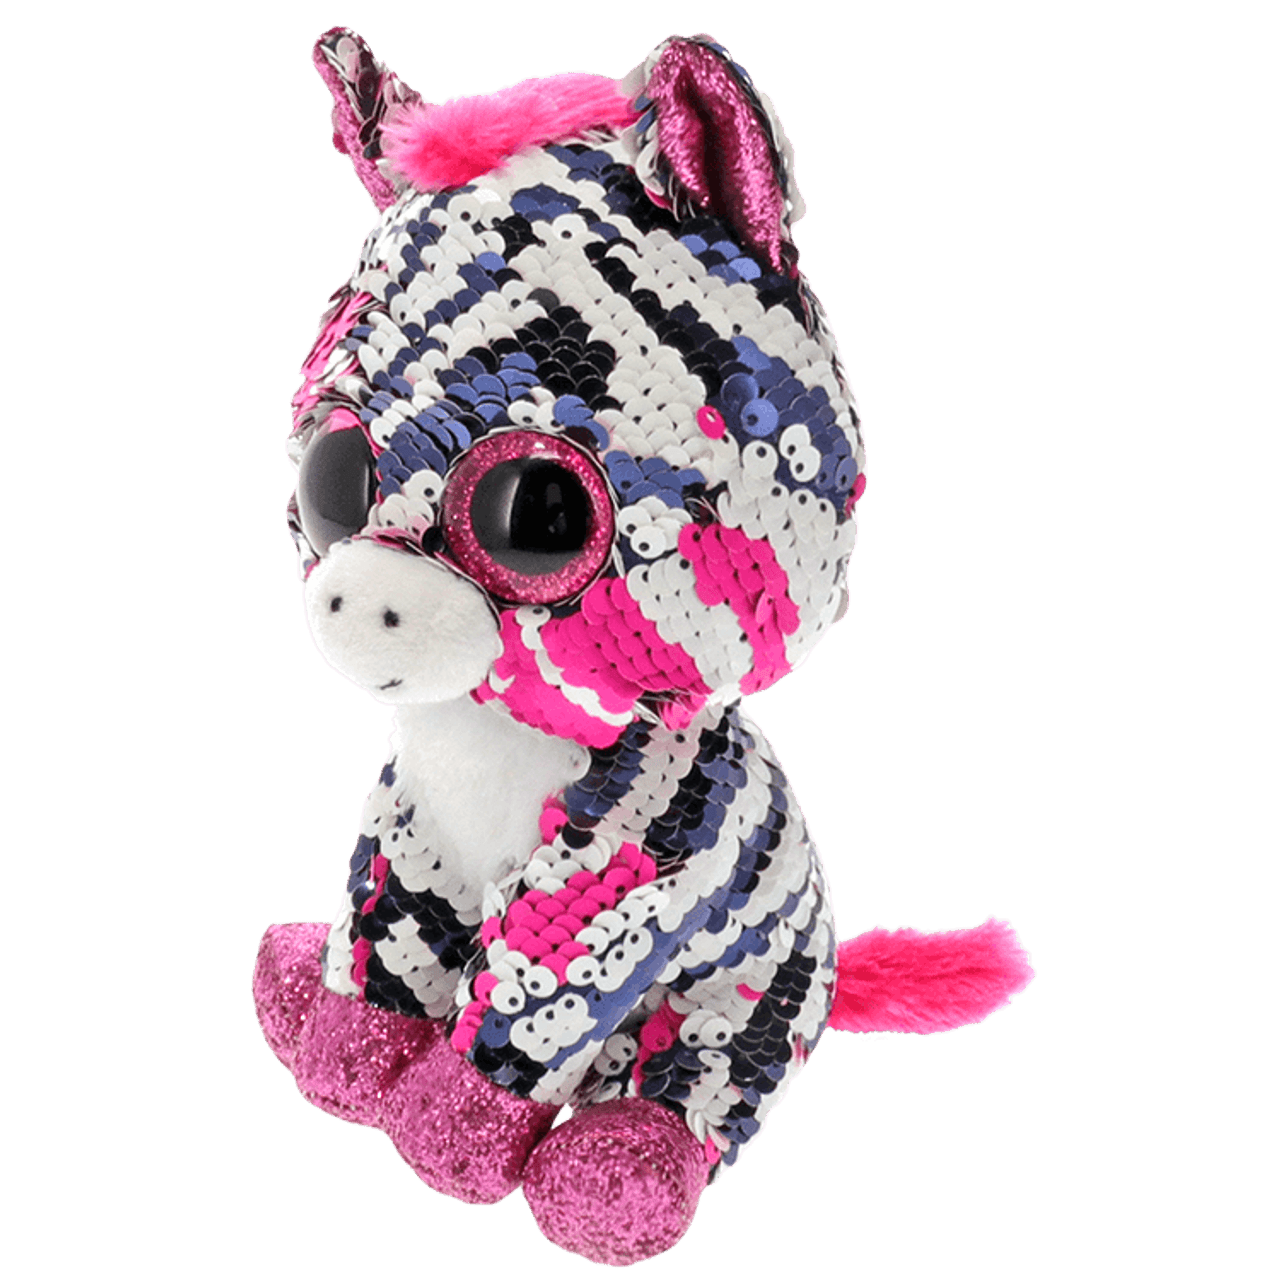 TY BEANIE BOOS Clip Zoey The Zebra Plush Toy 10cm New With Tags PP1 $13.45  - PicClick AU